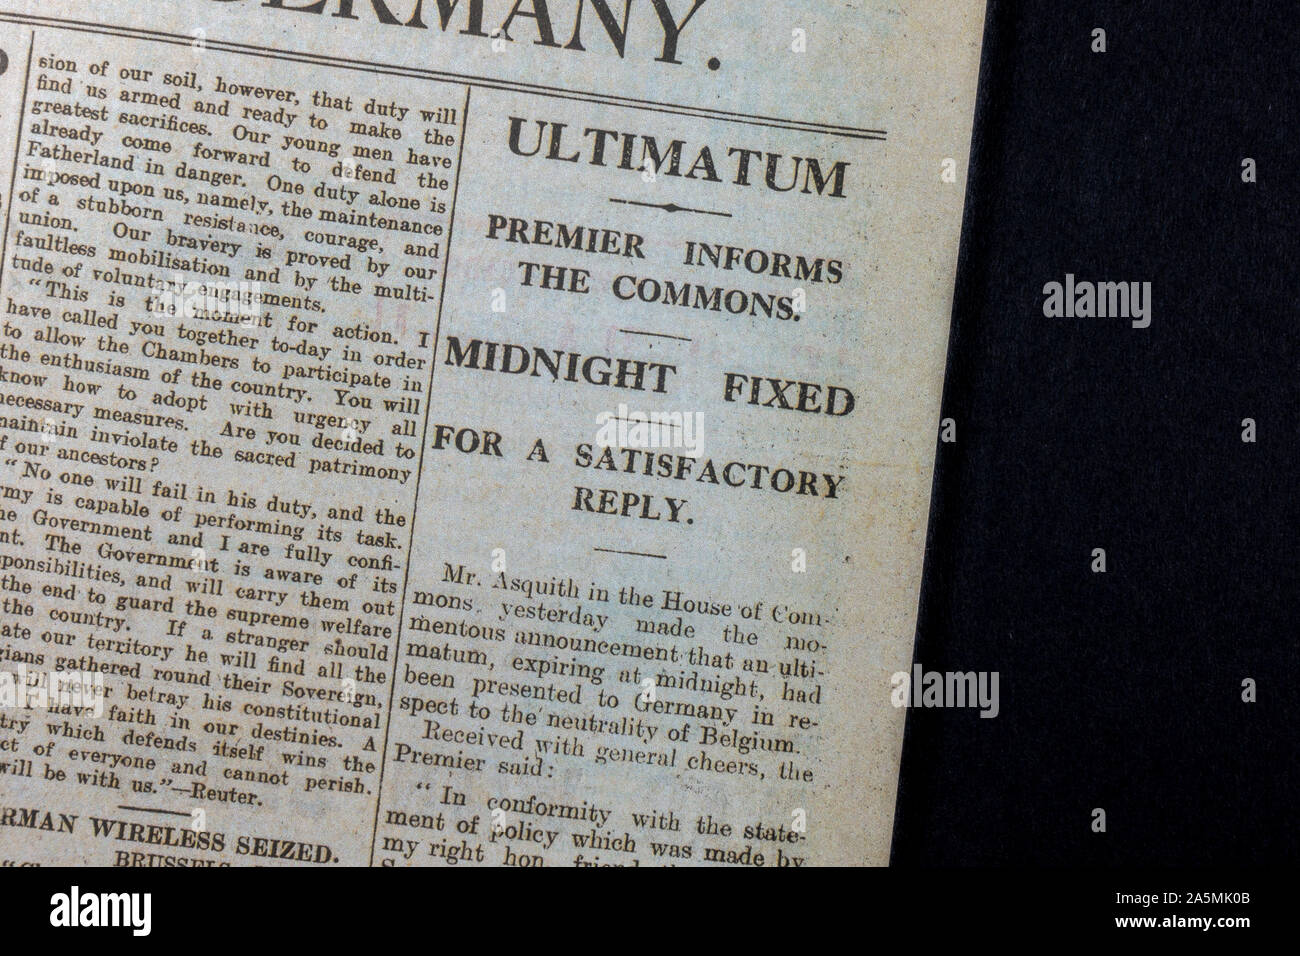 'Ultimatum' headline: The Daily News & Reader newspaper on Wednesday 5th August 1914 announcing the start of World War One. Stock Photo